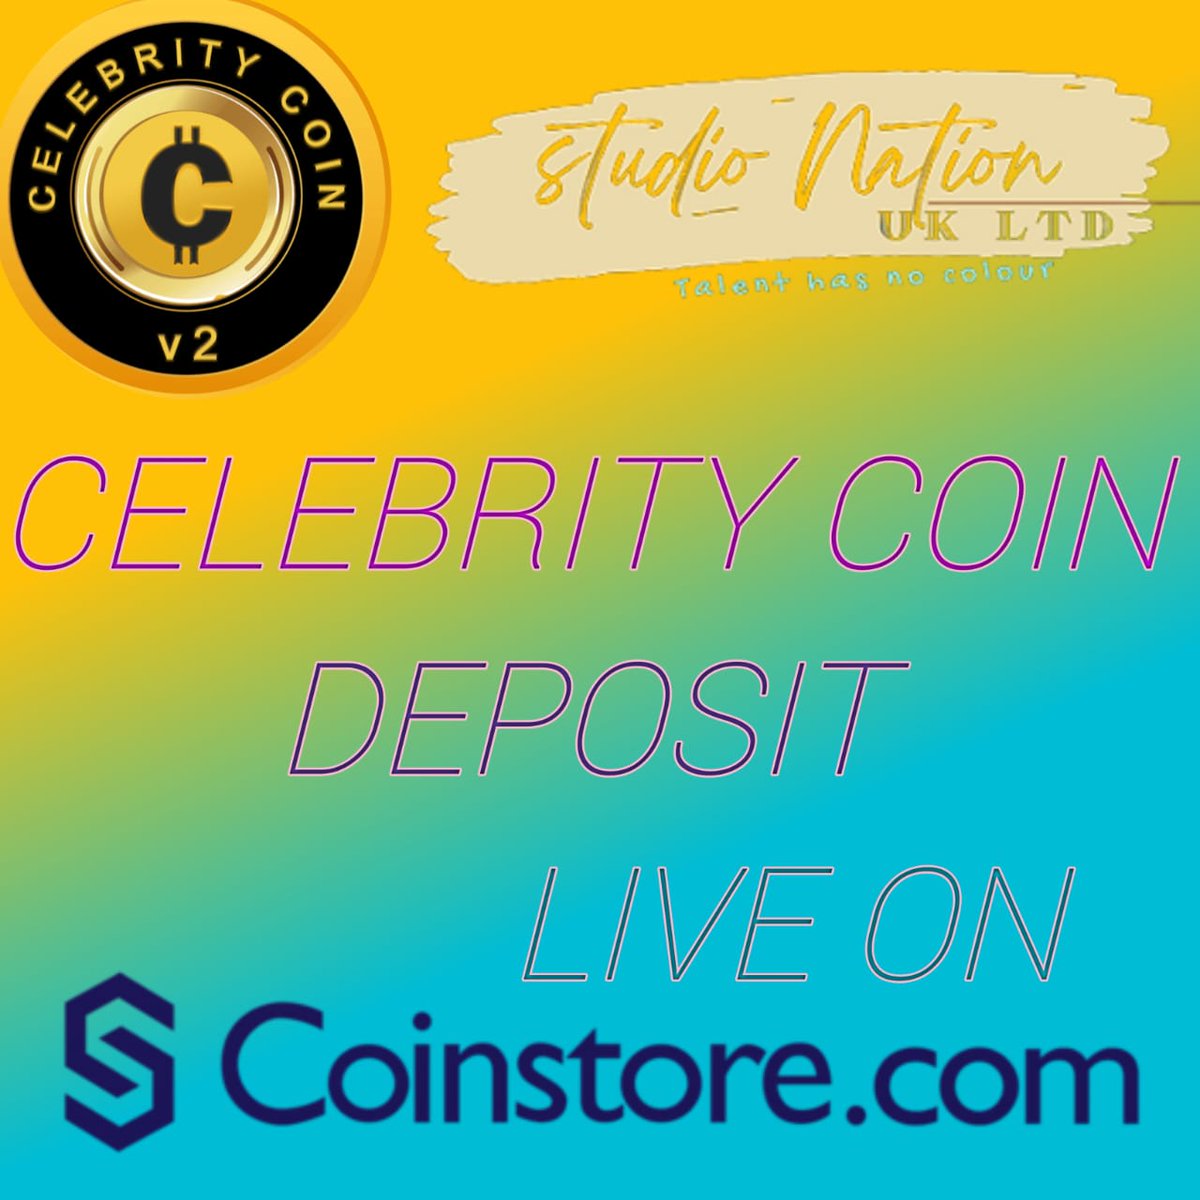 Celebrity coin (ccv2) deposit, withdrawal live on coinstore exchange

#STUDIONATION2 #celebritycoin #ccv2 #coinstore #CoinMarketCap #Cryptocurency #CRYPTOINVESTING #cryptotrading #CryptoArt #CRYPTOCURRENCYCOMMUNITY